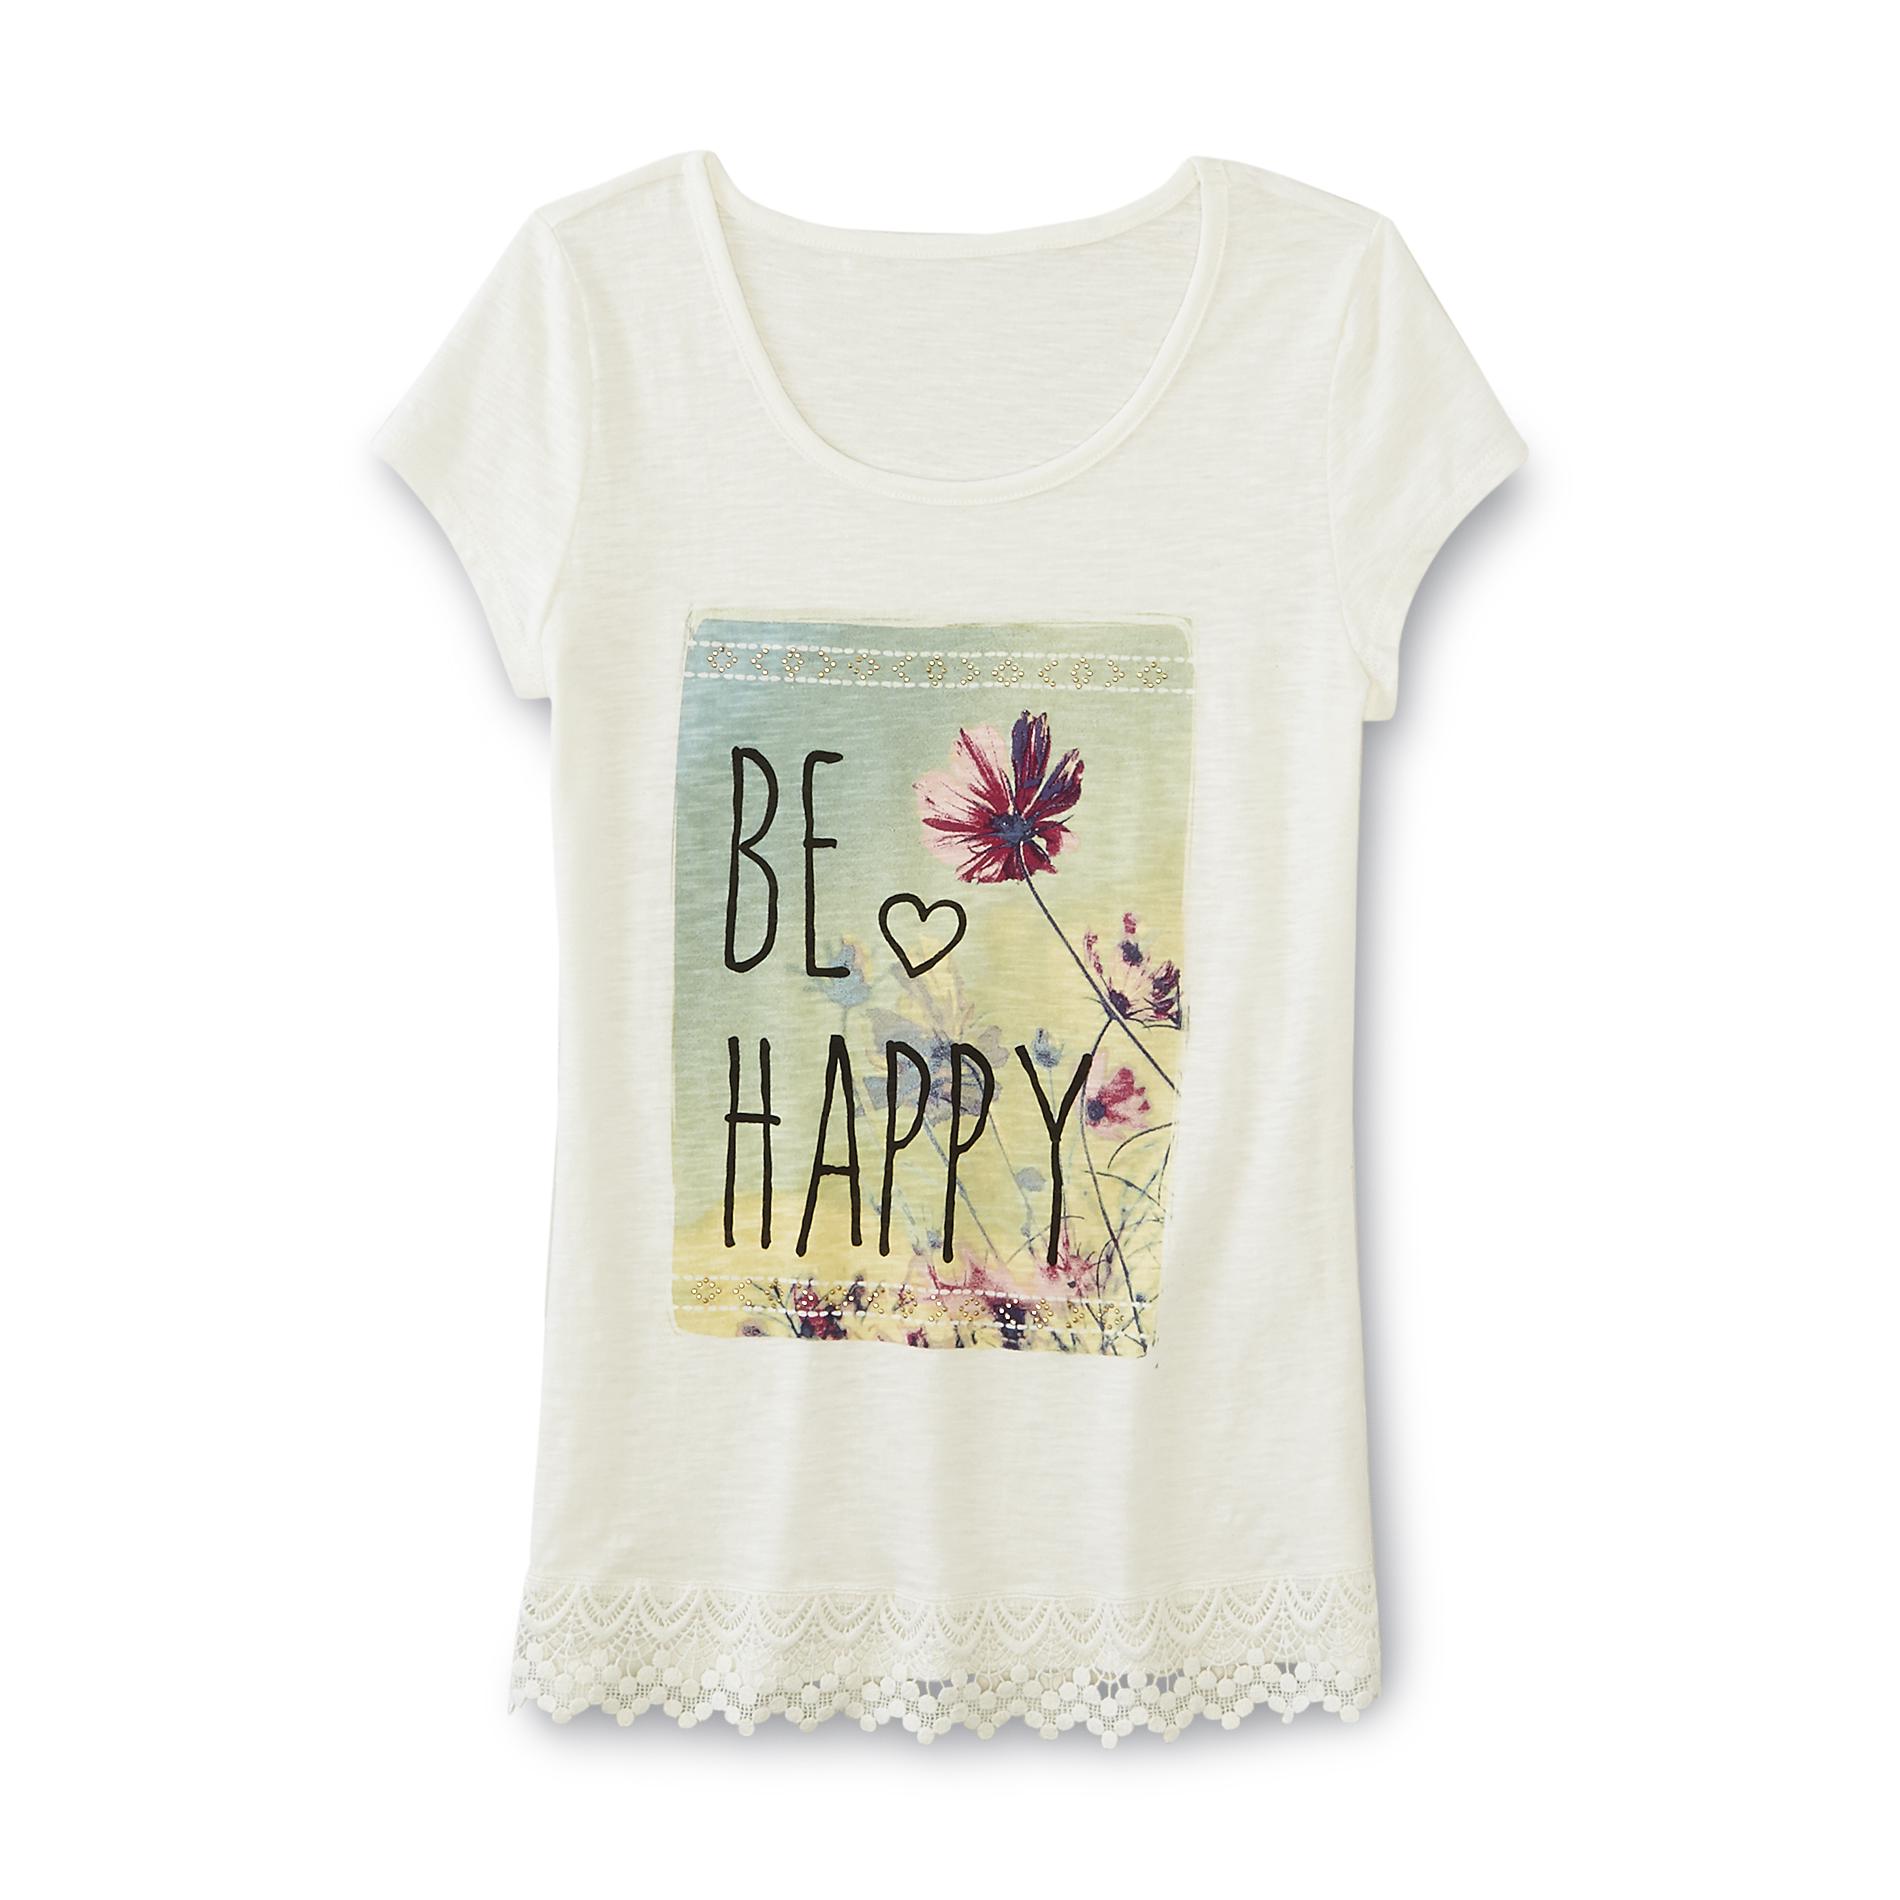 Canyon River Blues Girl's Graphic T-Shirt - Be Happy